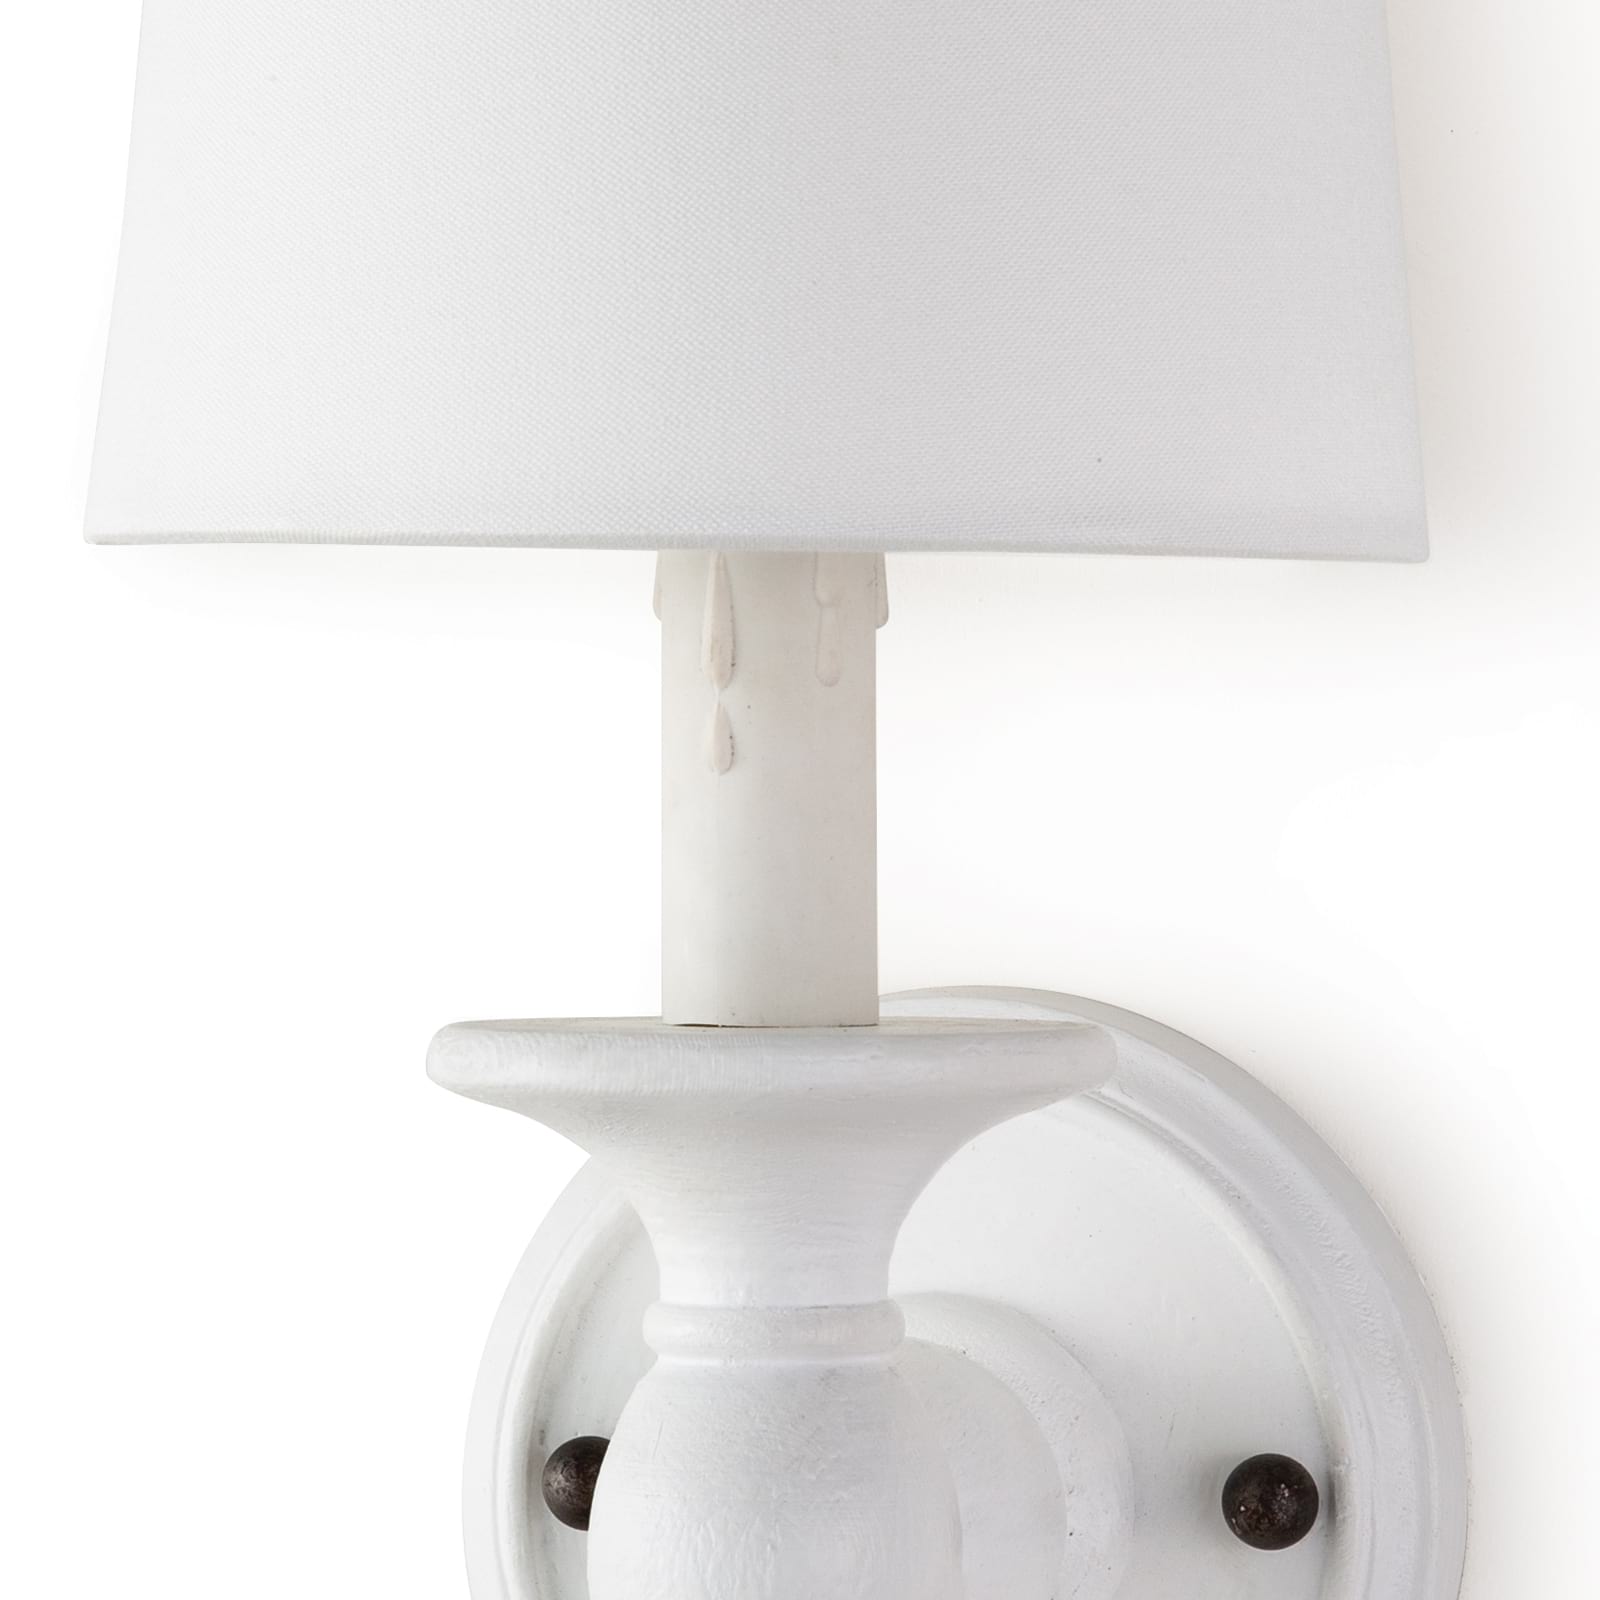 Perennial Sconce in White by Coastal Living